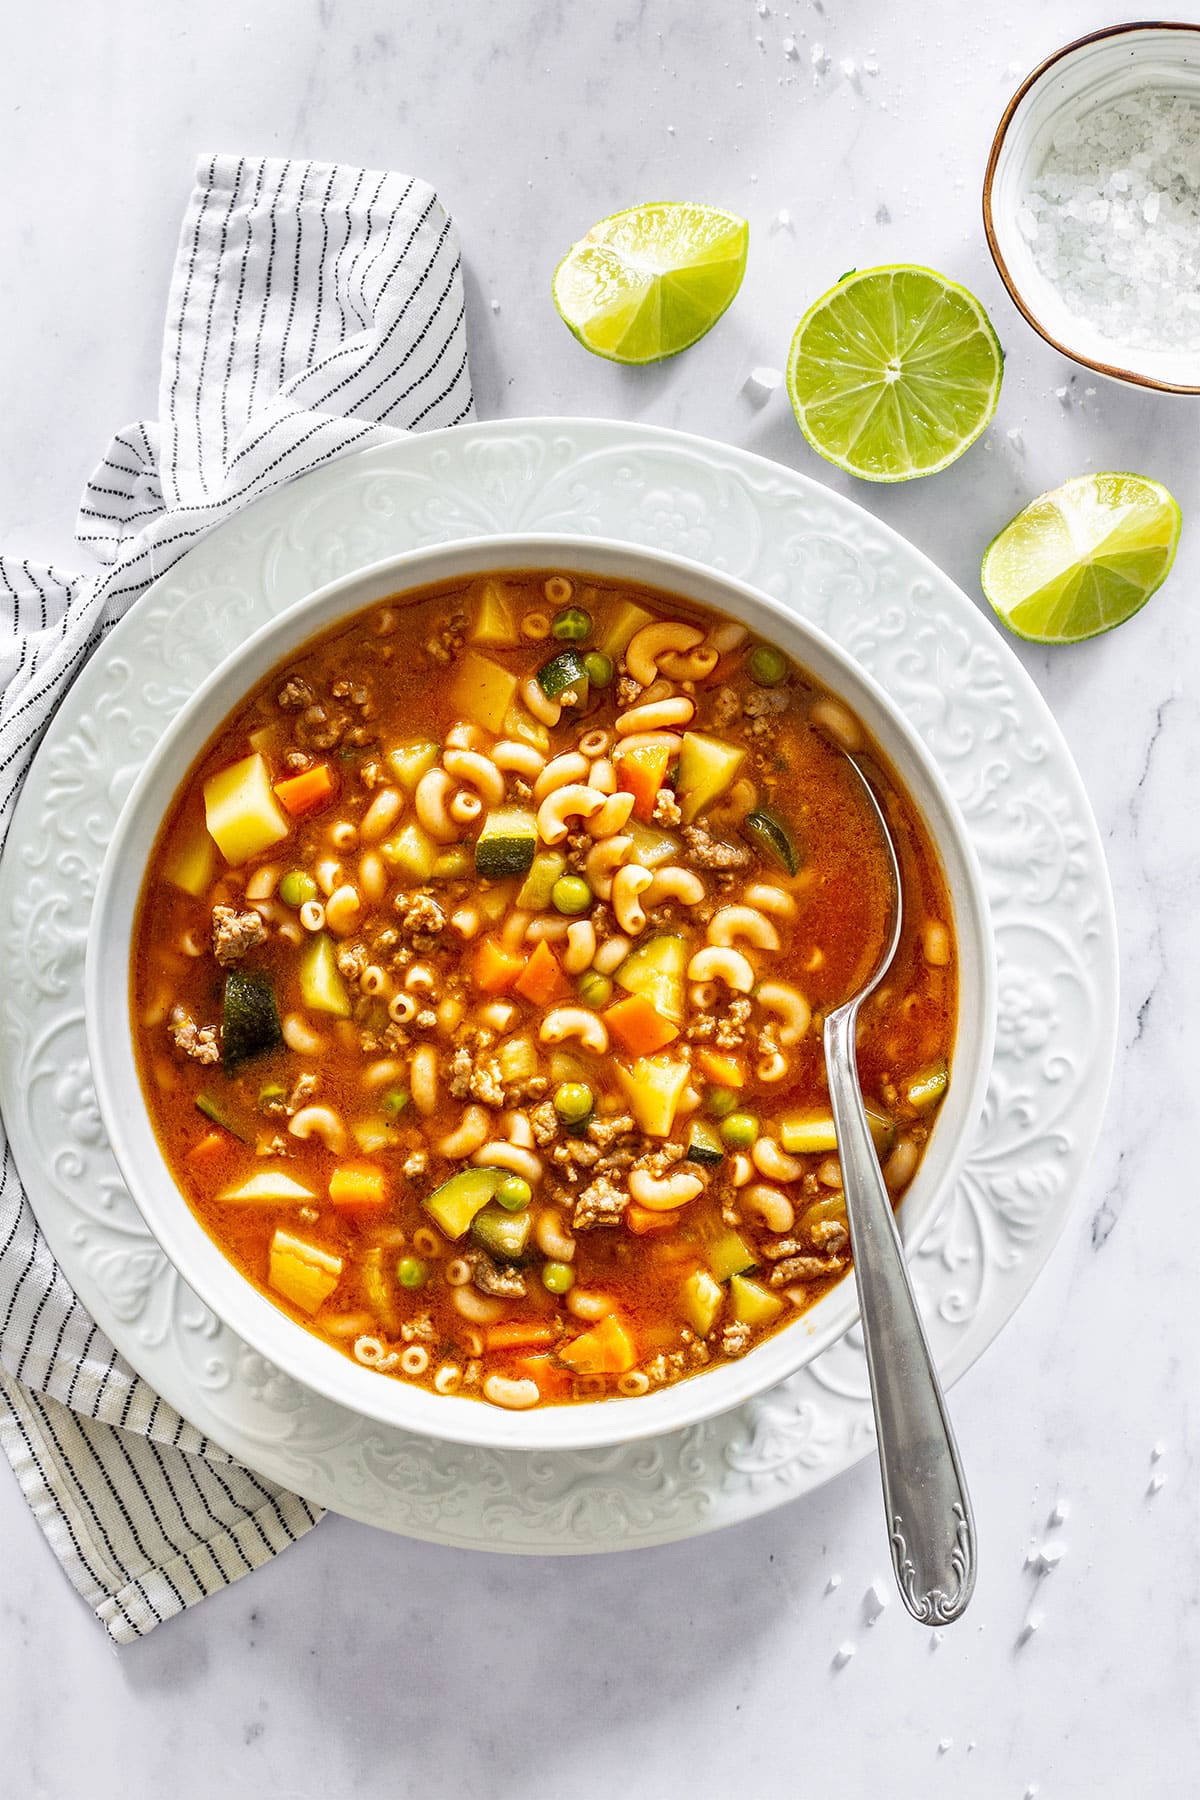 Mexican sopa de coditos served in a plate with some lime wedges on the side.